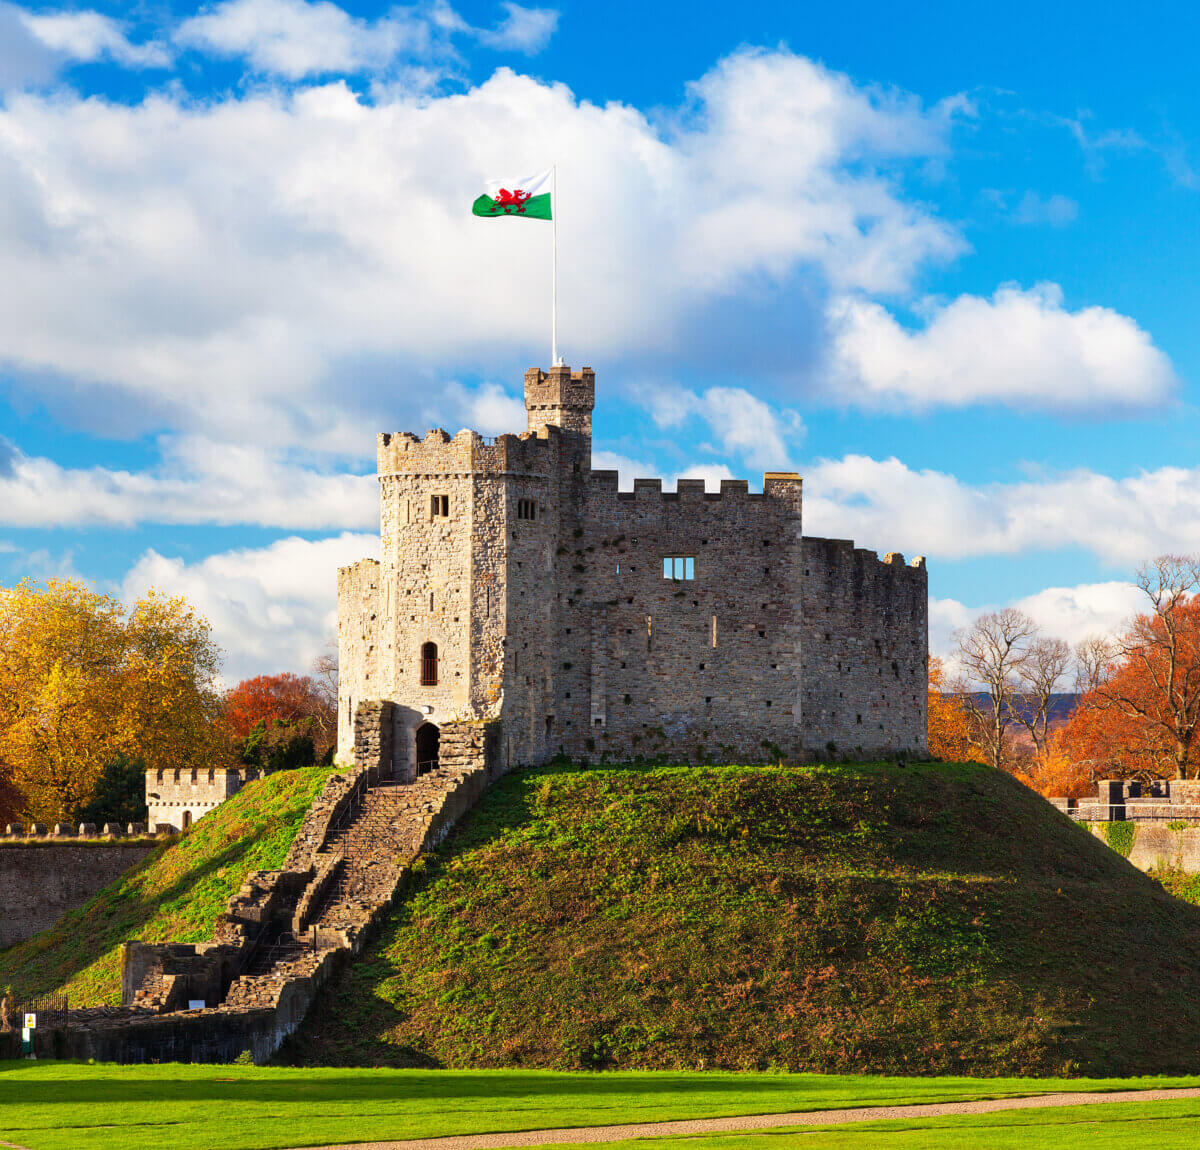 A view of Cardiff Castle.